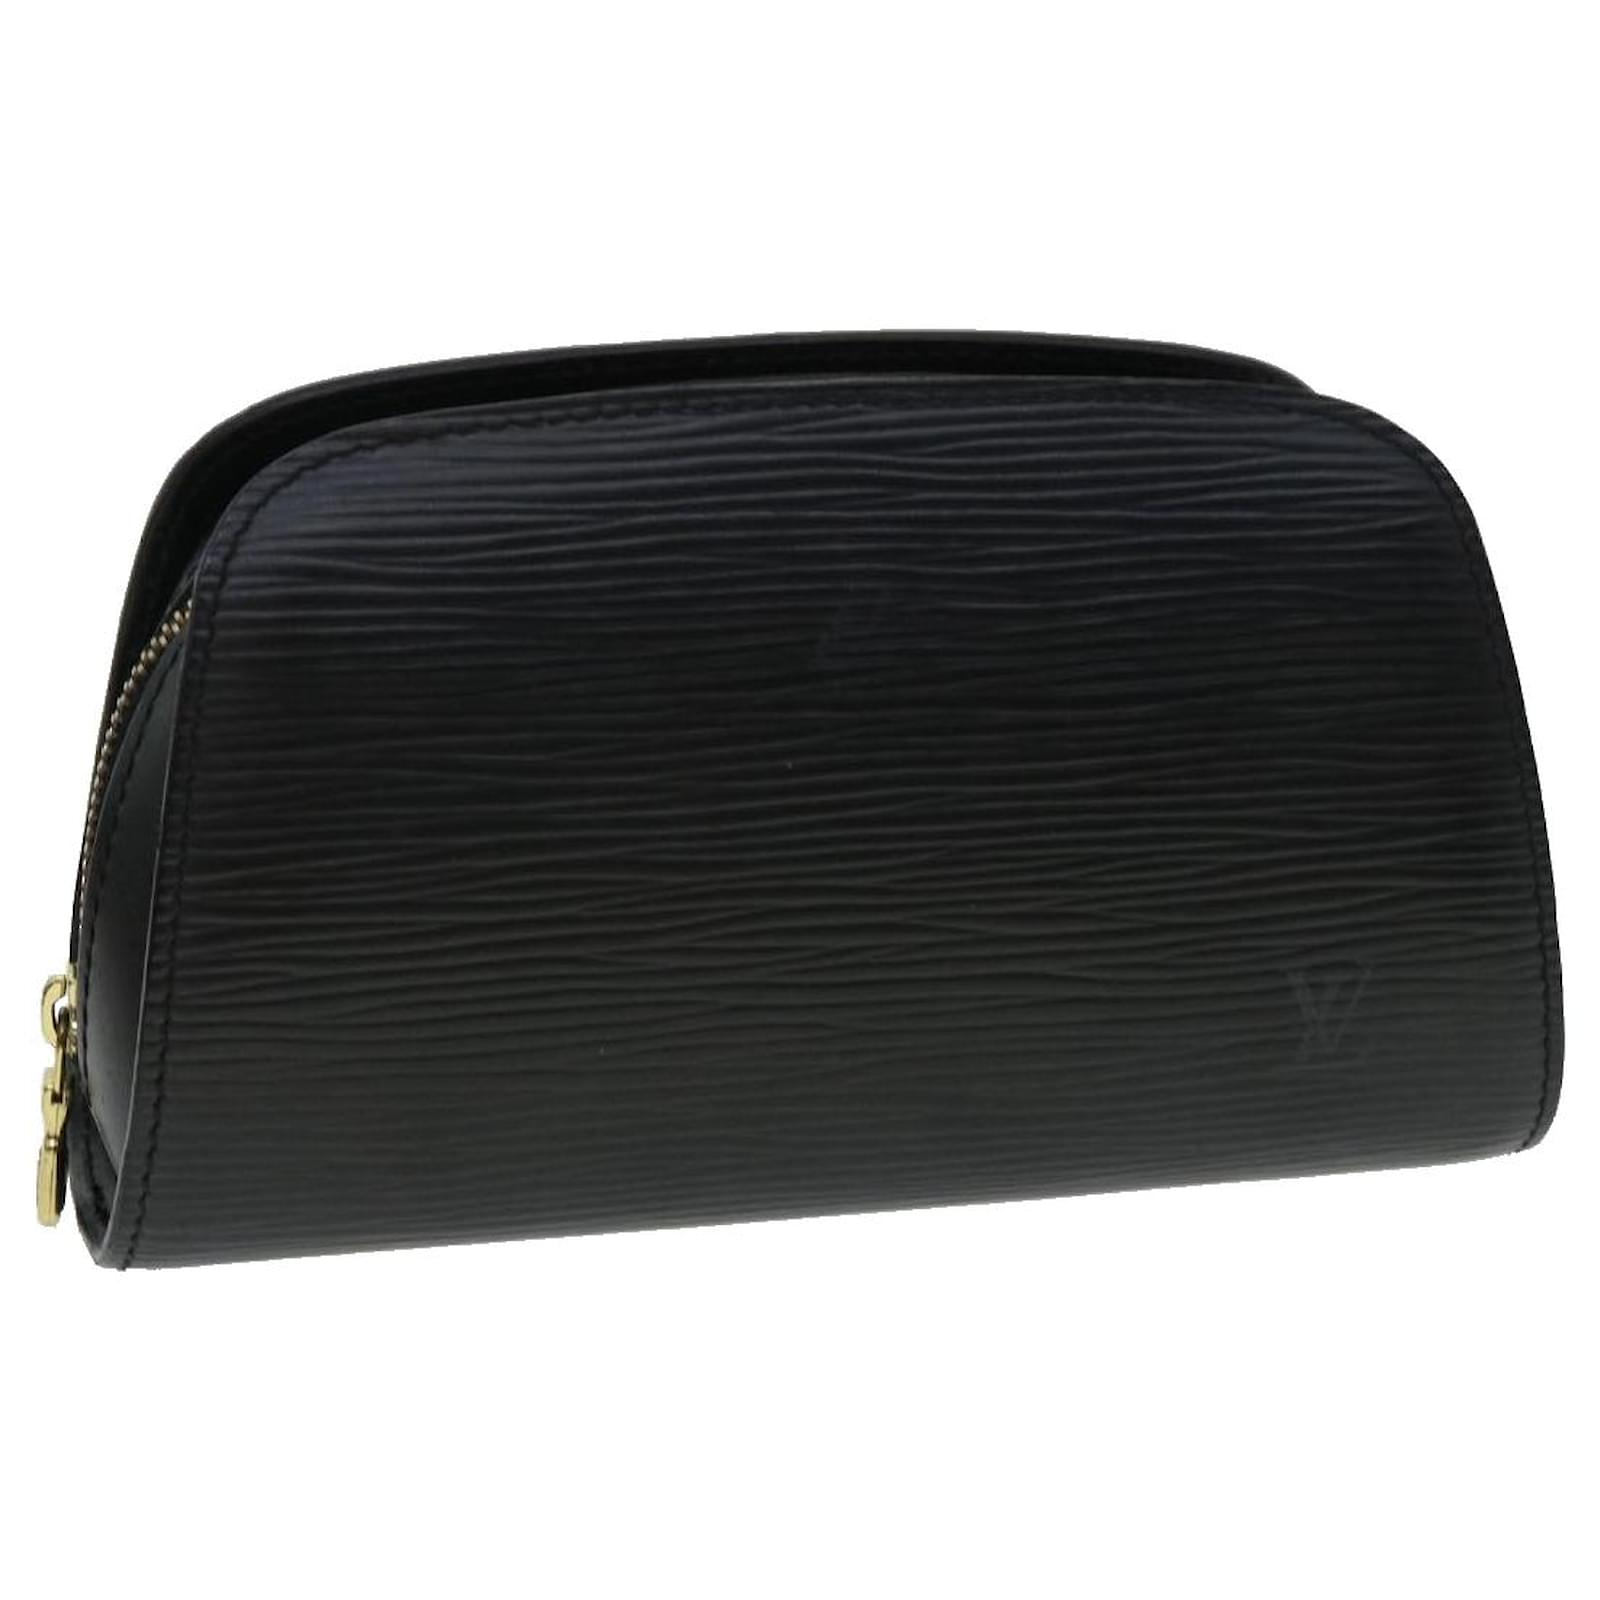 LOUIS VUITTON Epi Dauphine Leather Cosmetics Pouch Makeup Bag in